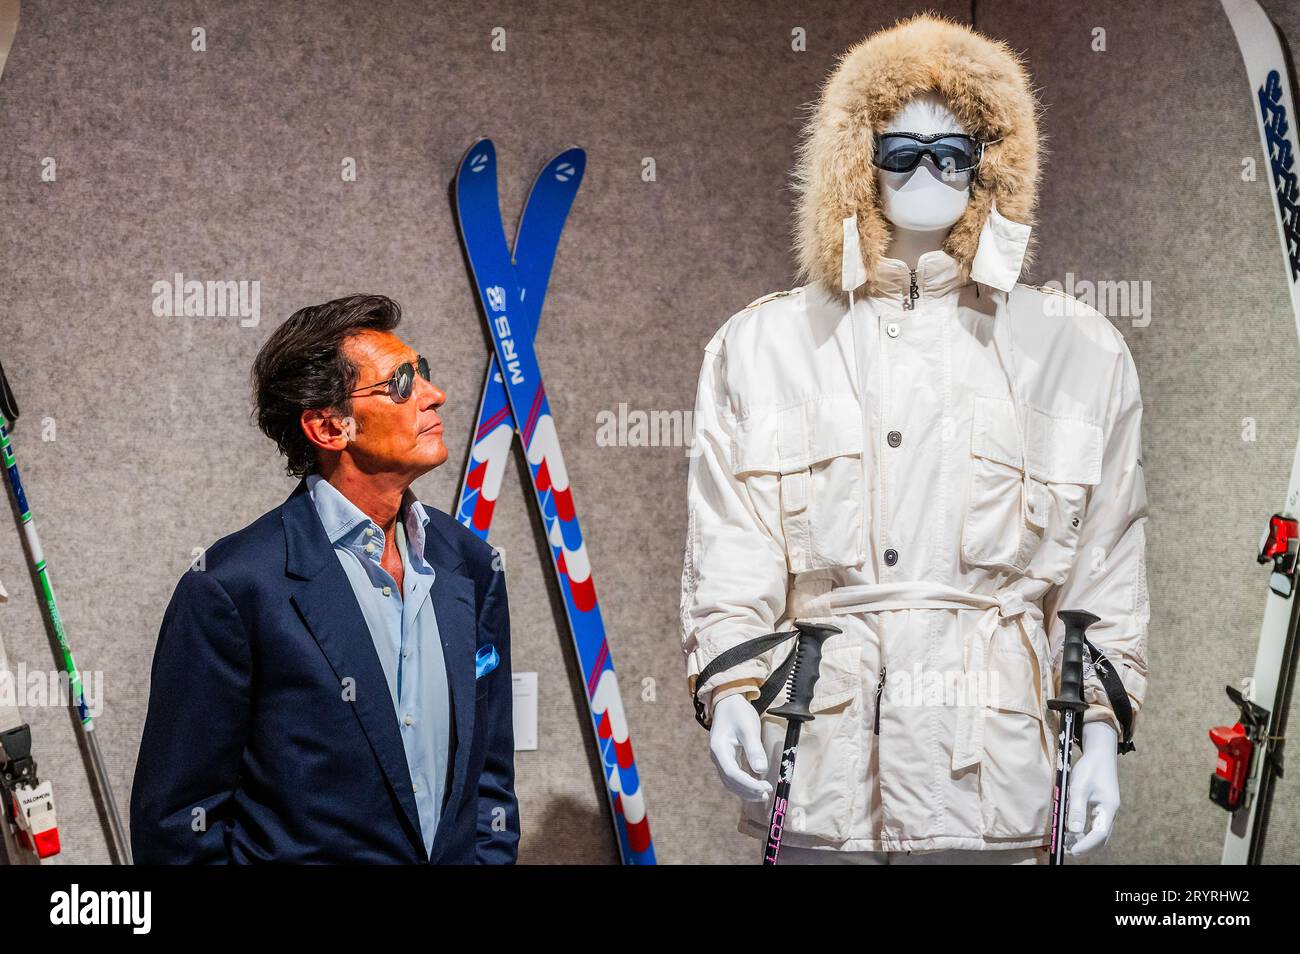 London, UK. 2nd Oct, 2023. Geoffrey Moore (his son) with A Bogner white ski suit purchased for Sir Roger Moore in A View to a Kill, 1985, est £15,000 - £25,000 -  Roger Moore: The Personal Collection at Bonhams New Bond Street, London. On 4 October, 180 lots will be auctioned, marking the 50th anniversary year of his first appearance as 007. Credit: Guy Bell/Alamy Live News Stock Photo